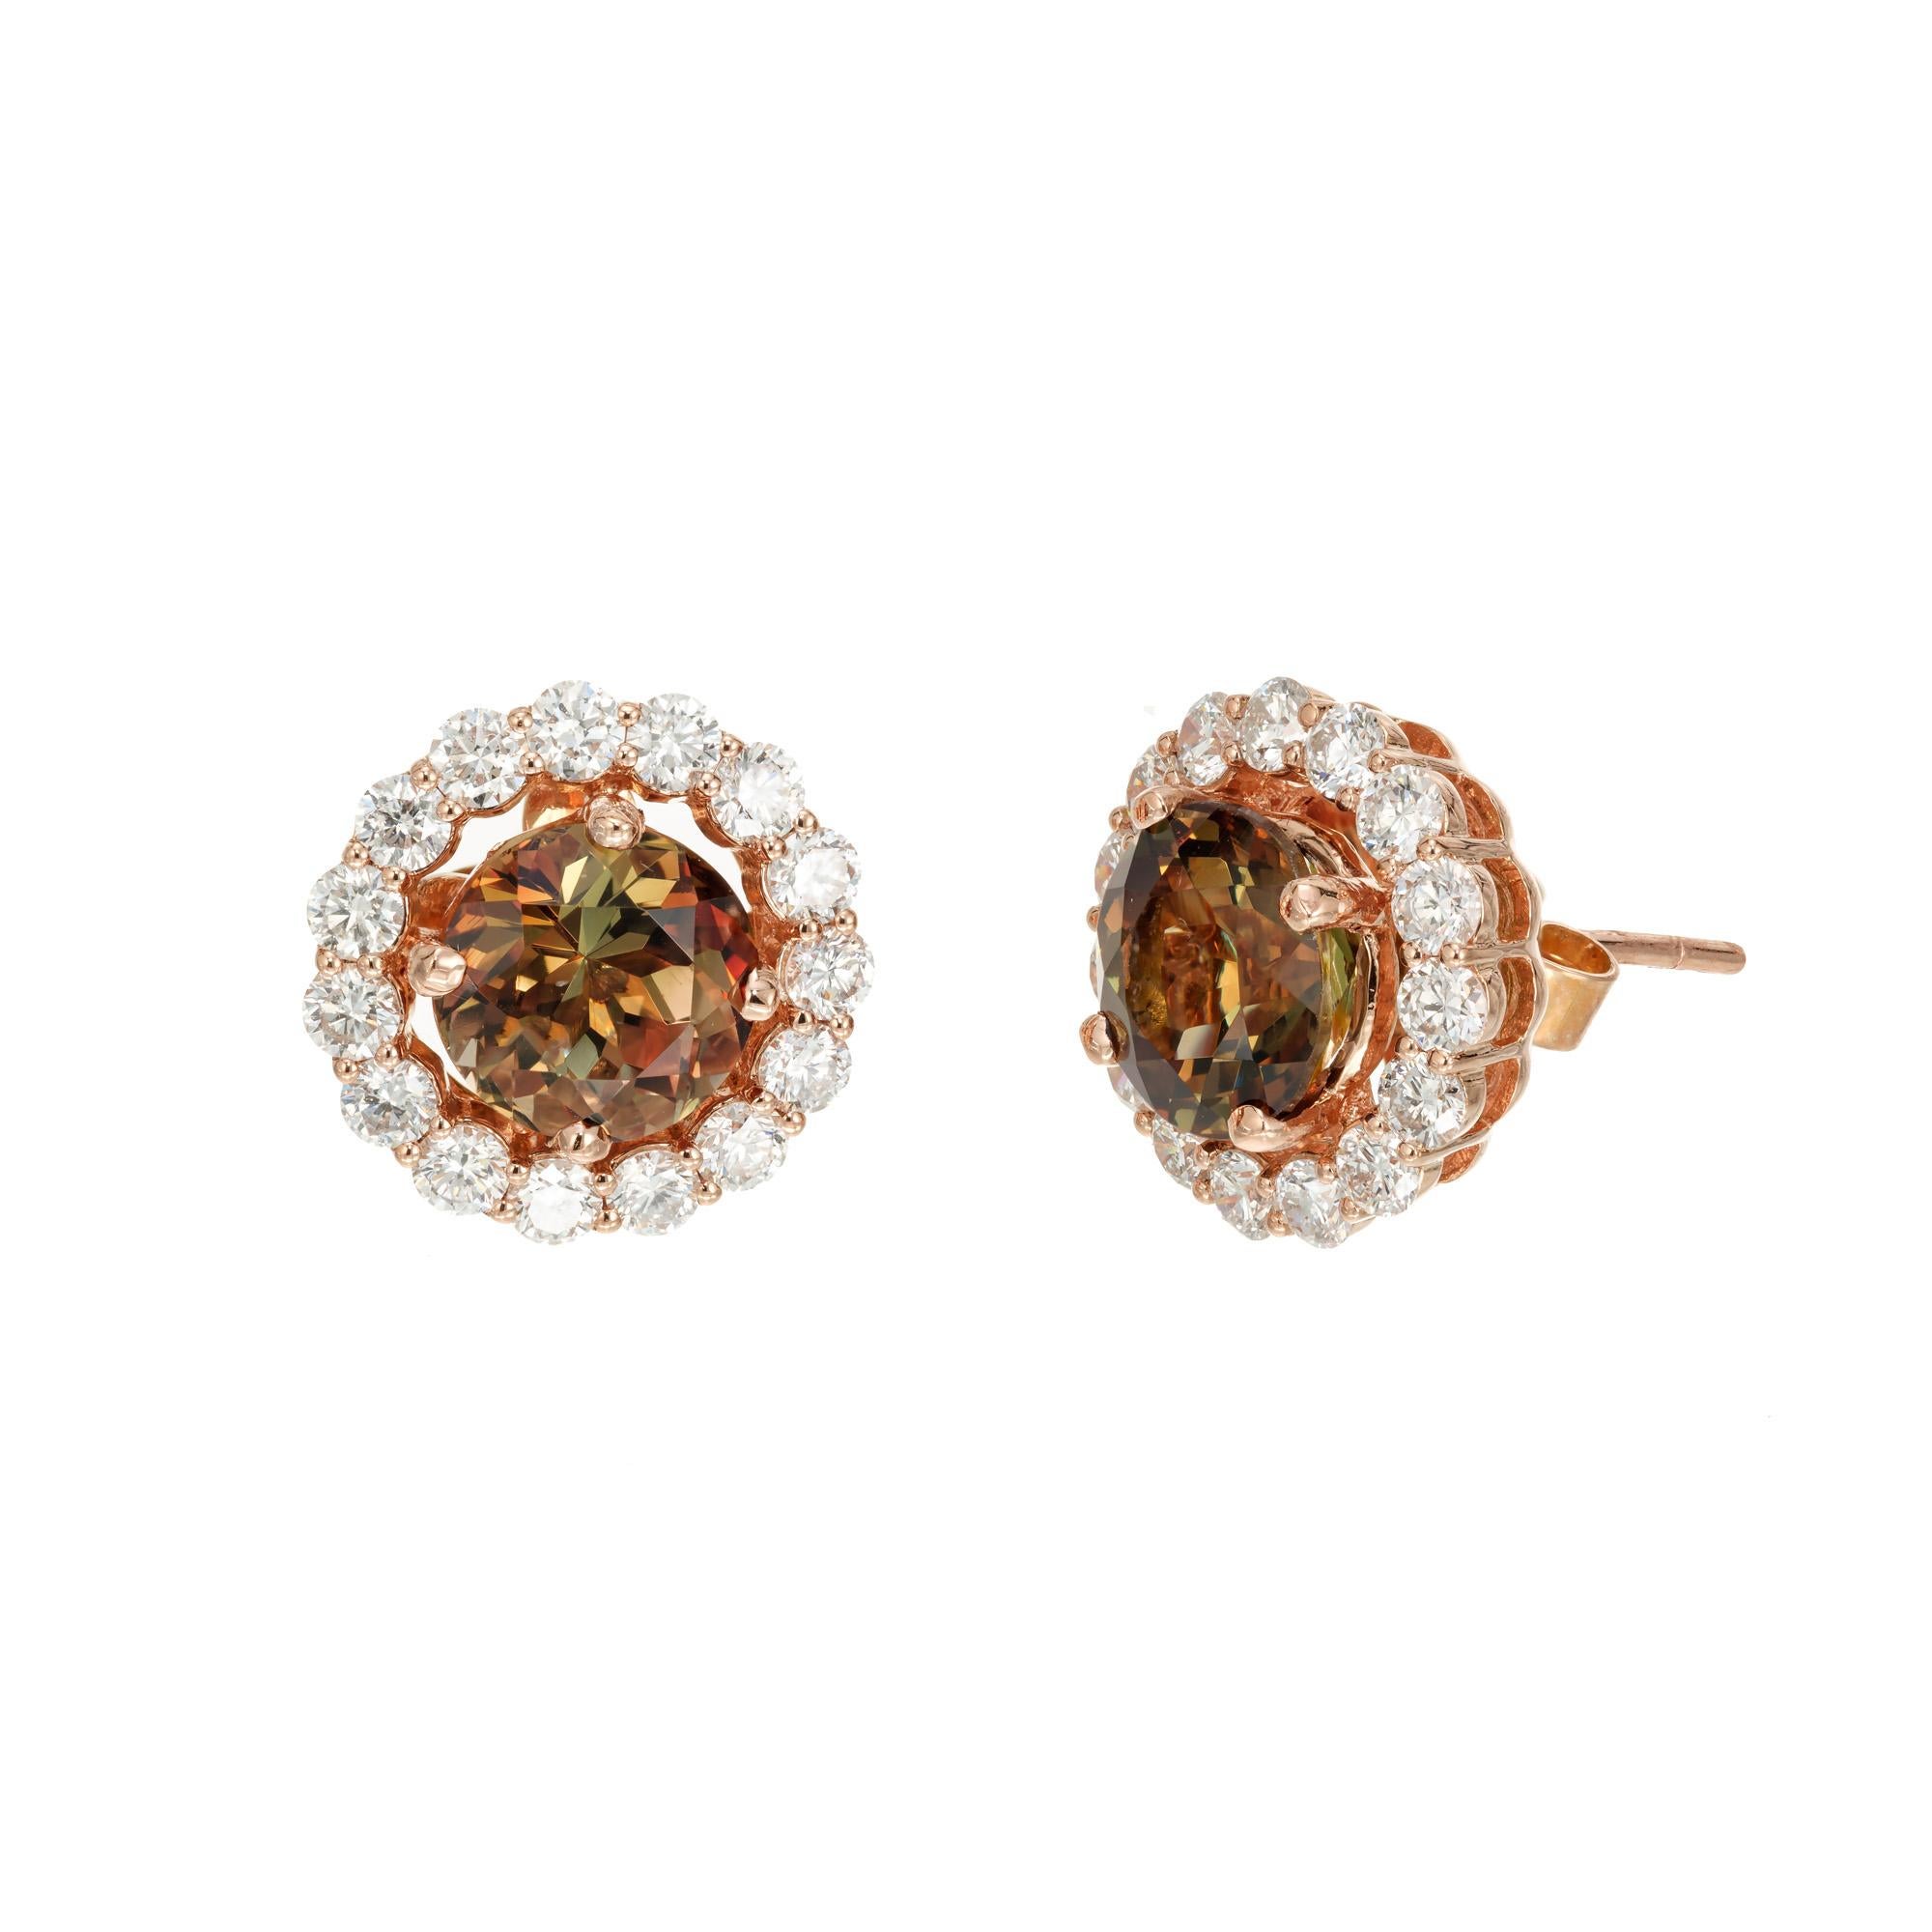 Andalusite and diamond earrings. 2 round Andalusite set in 18k rose gold settings each with round diamond halos. Andolusite bright color change in the brown, orange and green range. Designed and crafted in the Peter Suchy Workshop.

2 round brownish